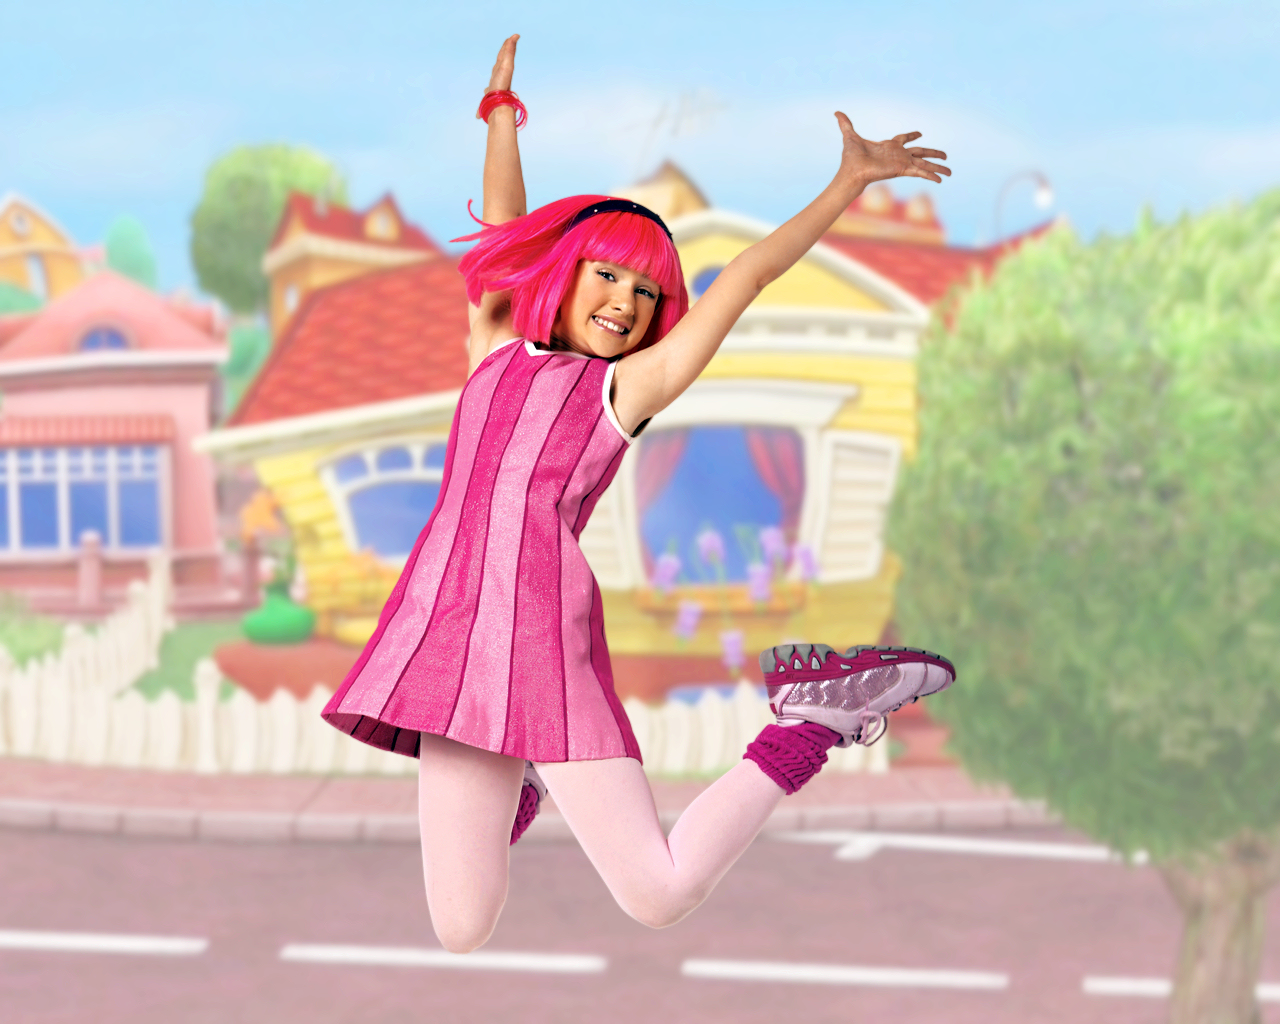 44 LazyTown HD Wallpapers | Backgrounds - Wallpaper Abyss